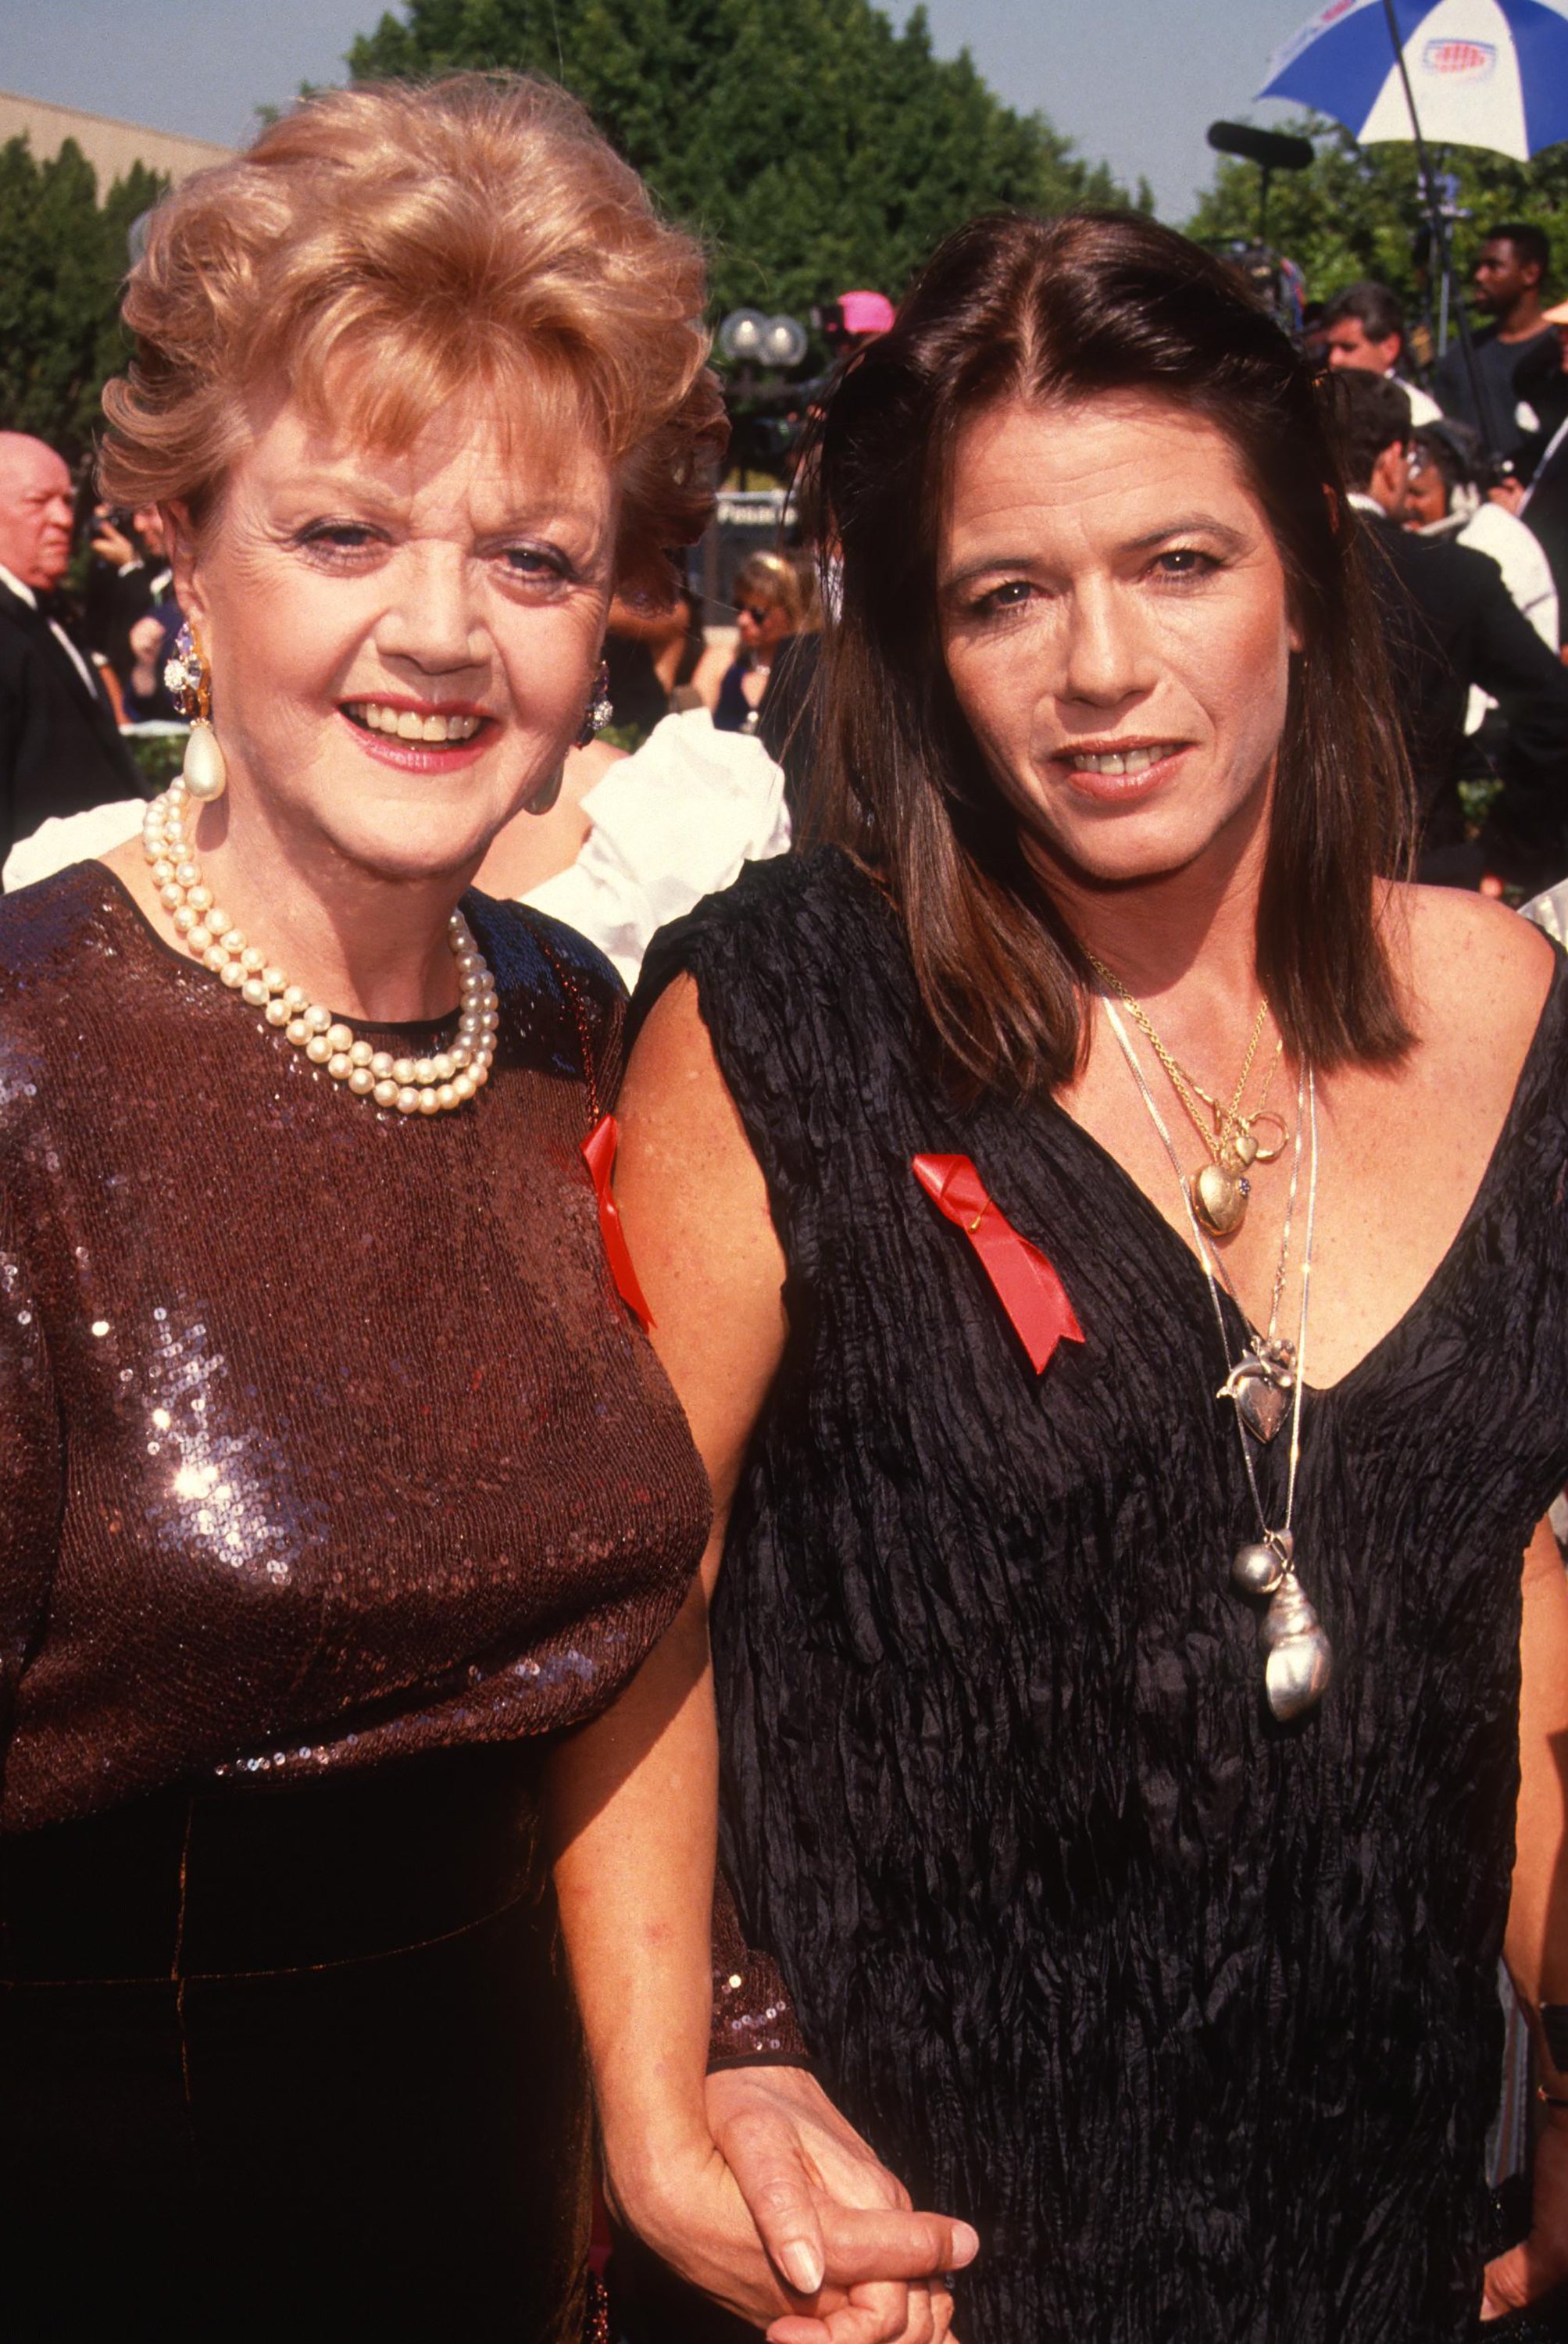 Angela Lansbury and her daughter Deidre Angela Shaw at the 43rd Annual Primetime Emmy Awards in Pasadena, California, on August 25, 1991 | Source: Getty Images